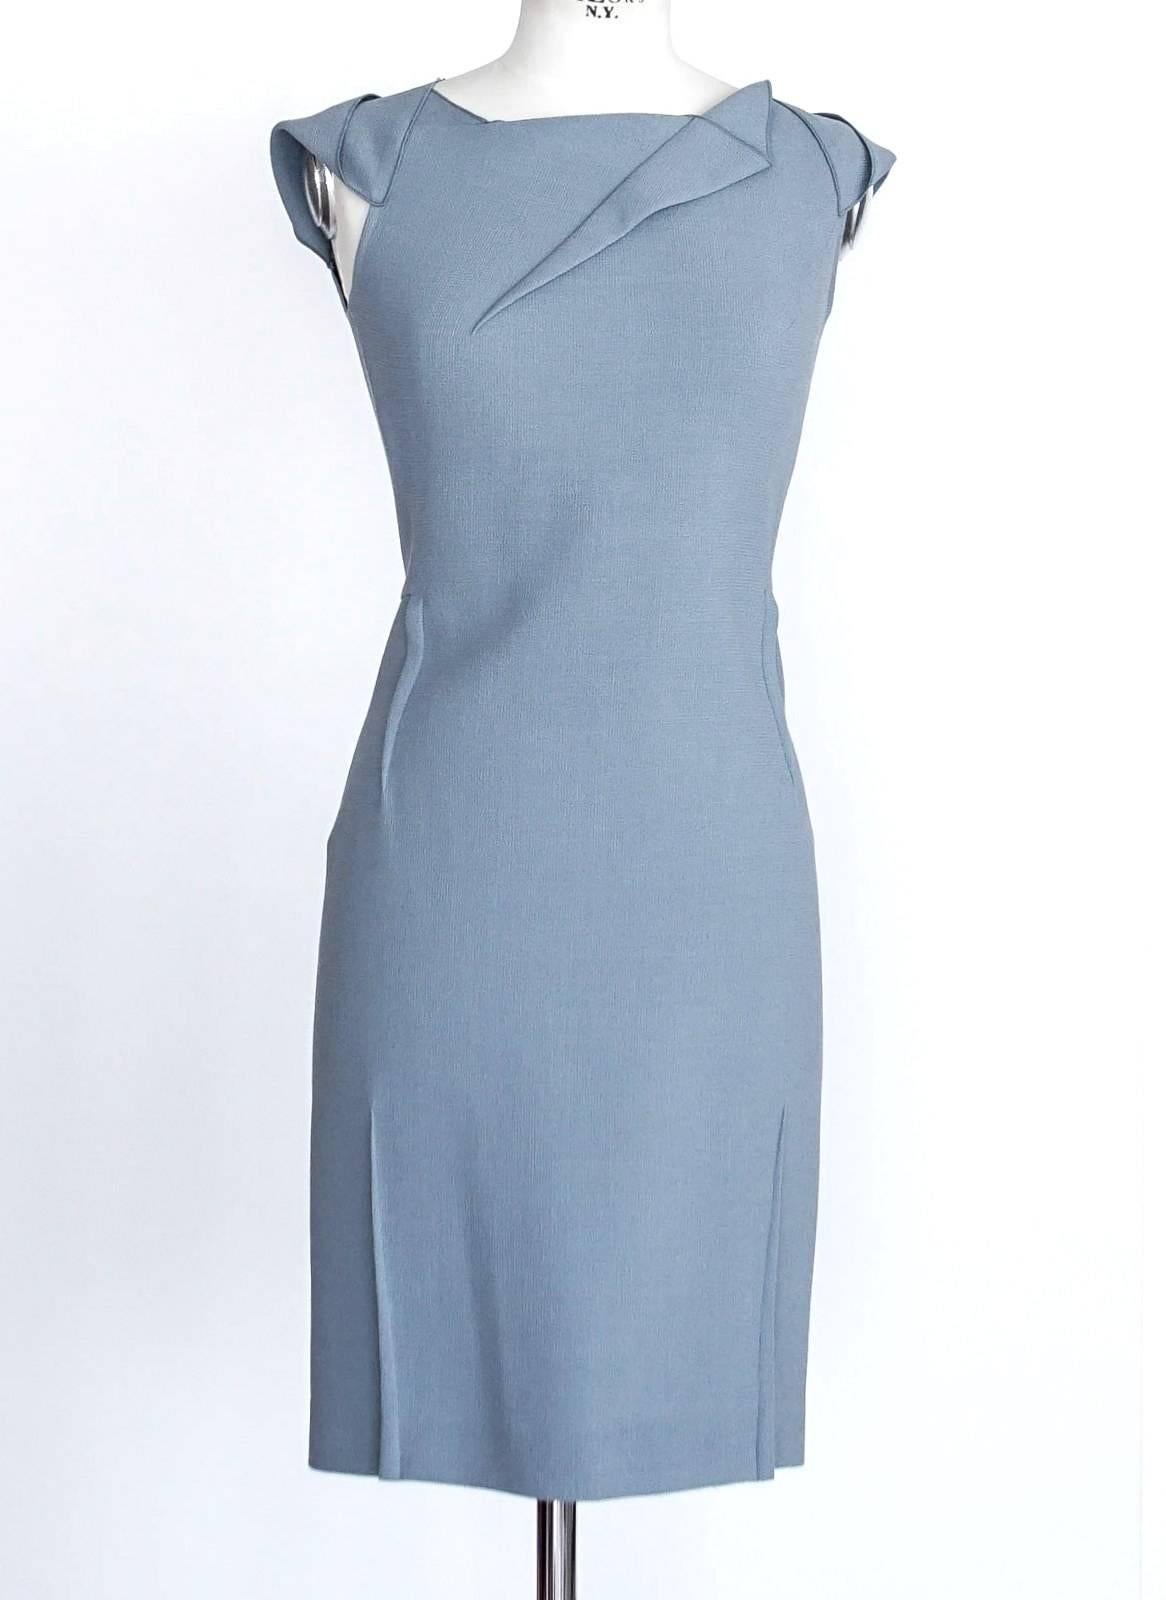 Guaranteed authentic ROLAND MOURET architecturally styled dress.
A versatile work/luncheon/cocktail dress.
Beautifully cut blue gray dress with exquisite detail.
Textured wool fabric with bold rear zip.
final sale

SIZE 8
 
DRESS MEASURES:
LENGTH 